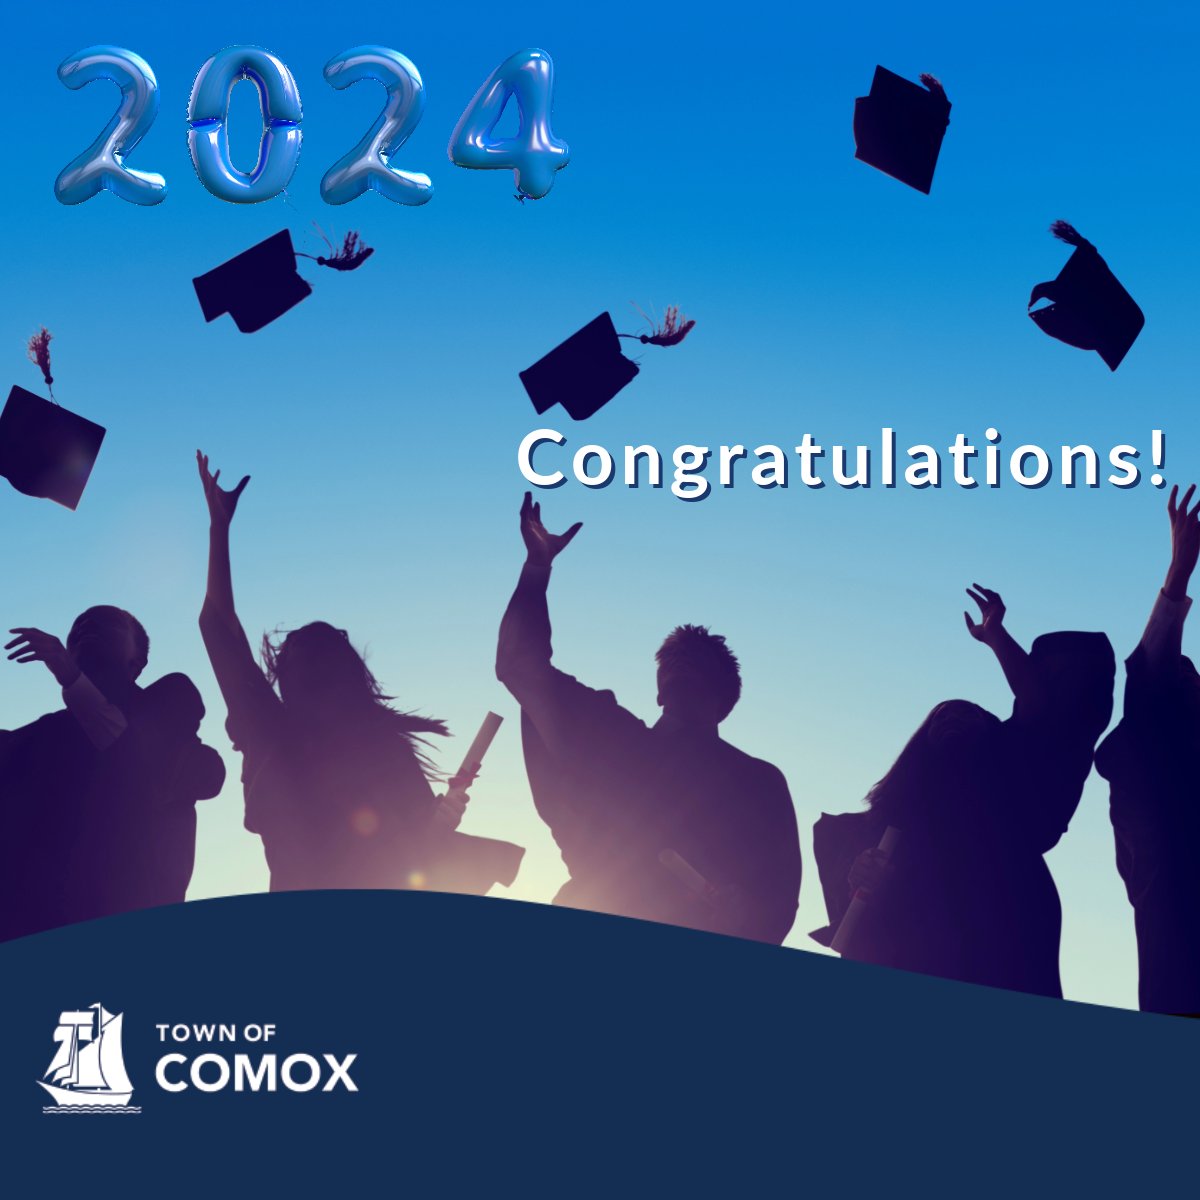 Highland Secondary grads of 2024, your big weekend is almost here!
We are sending high-fives to all Town of Comox graduates for all your hard work and achievements! 📷
Live, dream, soar - your possibilities are endless! Wishing you all the best.
 I #allschools I #homeschool